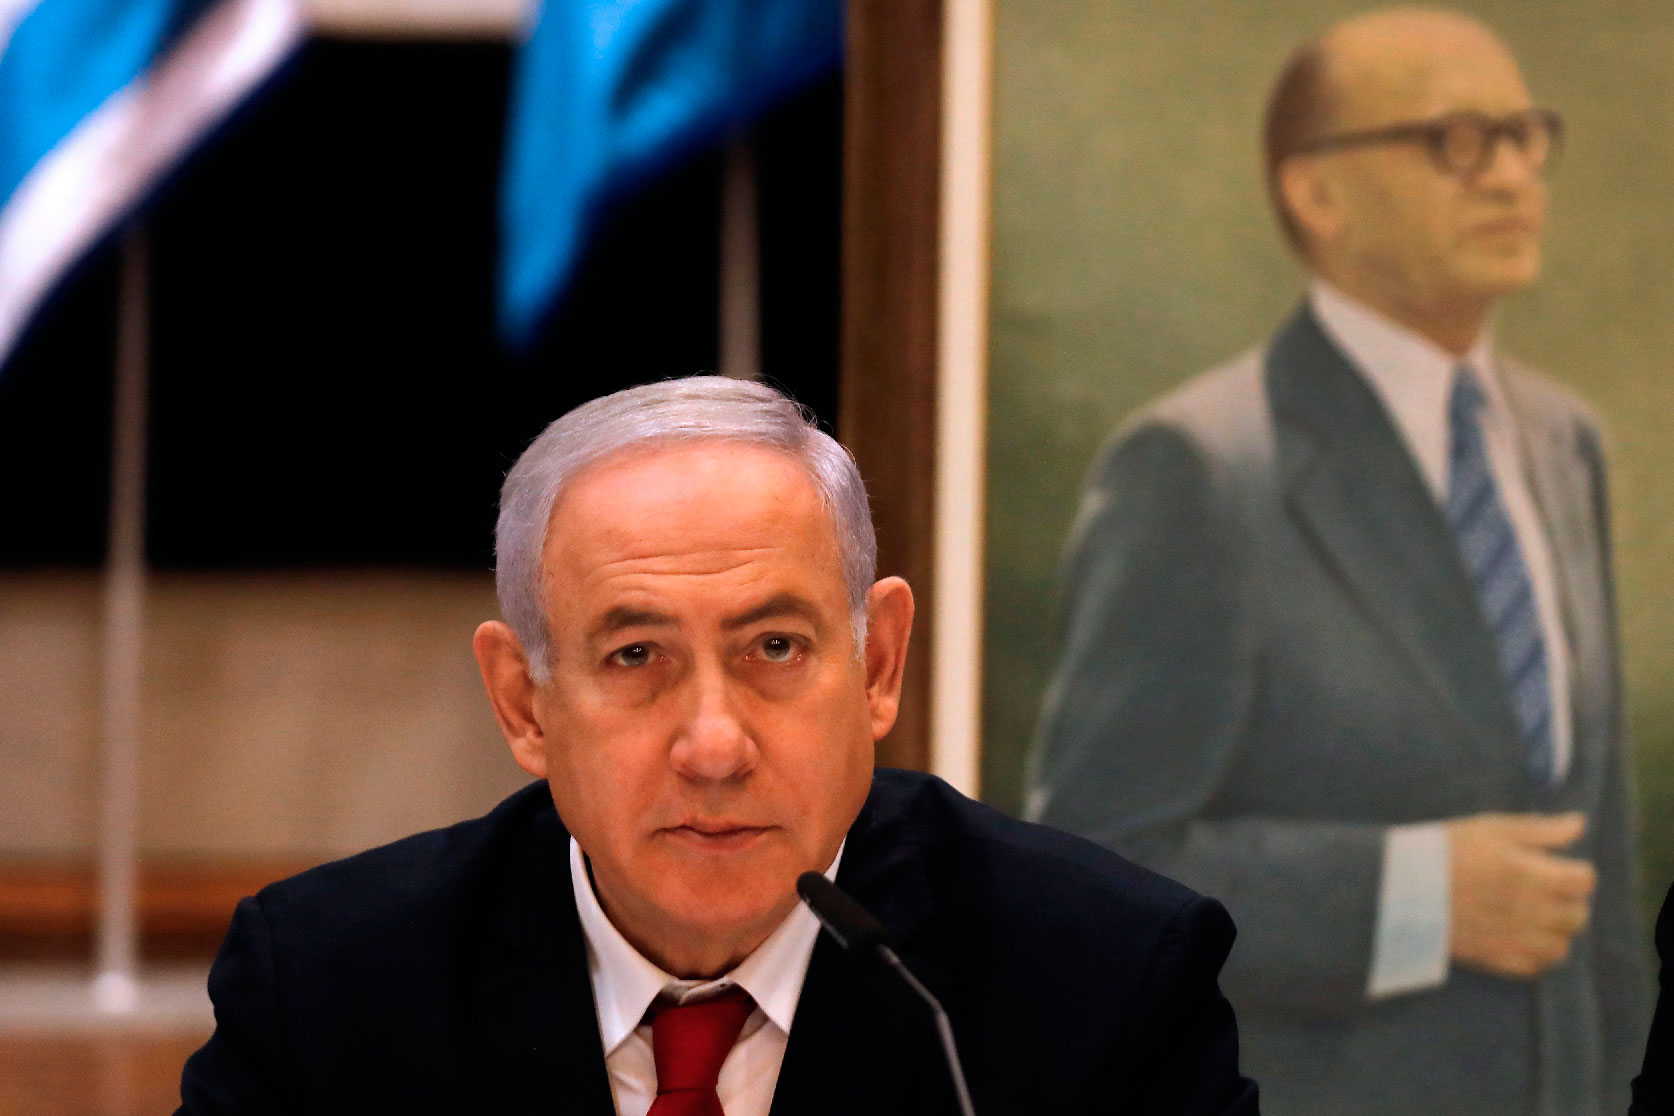 Israeli Prime Minister Benajmin Netanyahu delivers a statement during the Likud party meeting in memory of the late Prime Minister Menachem Begin at the Begin Heritage Center in Jerusalem, on March 11, 2019.